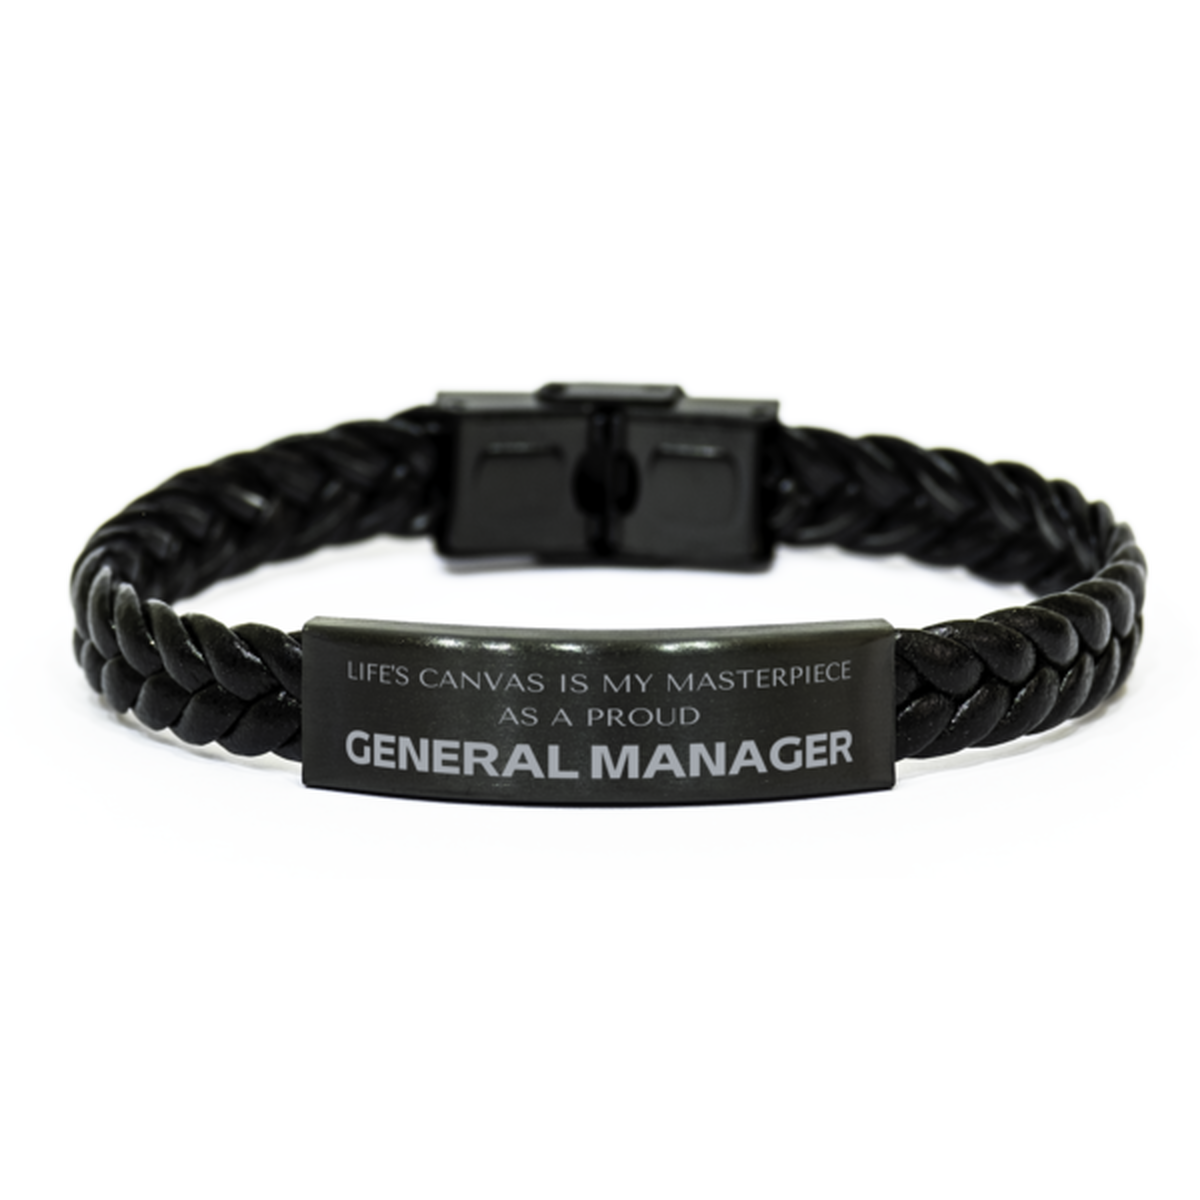 Proud General Manager Gifts, Life's canvas is my masterpiece, Epic Birthday Christmas Unique Braided Leather Bracelet For General Manager, Coworkers, Men, Women, Friends